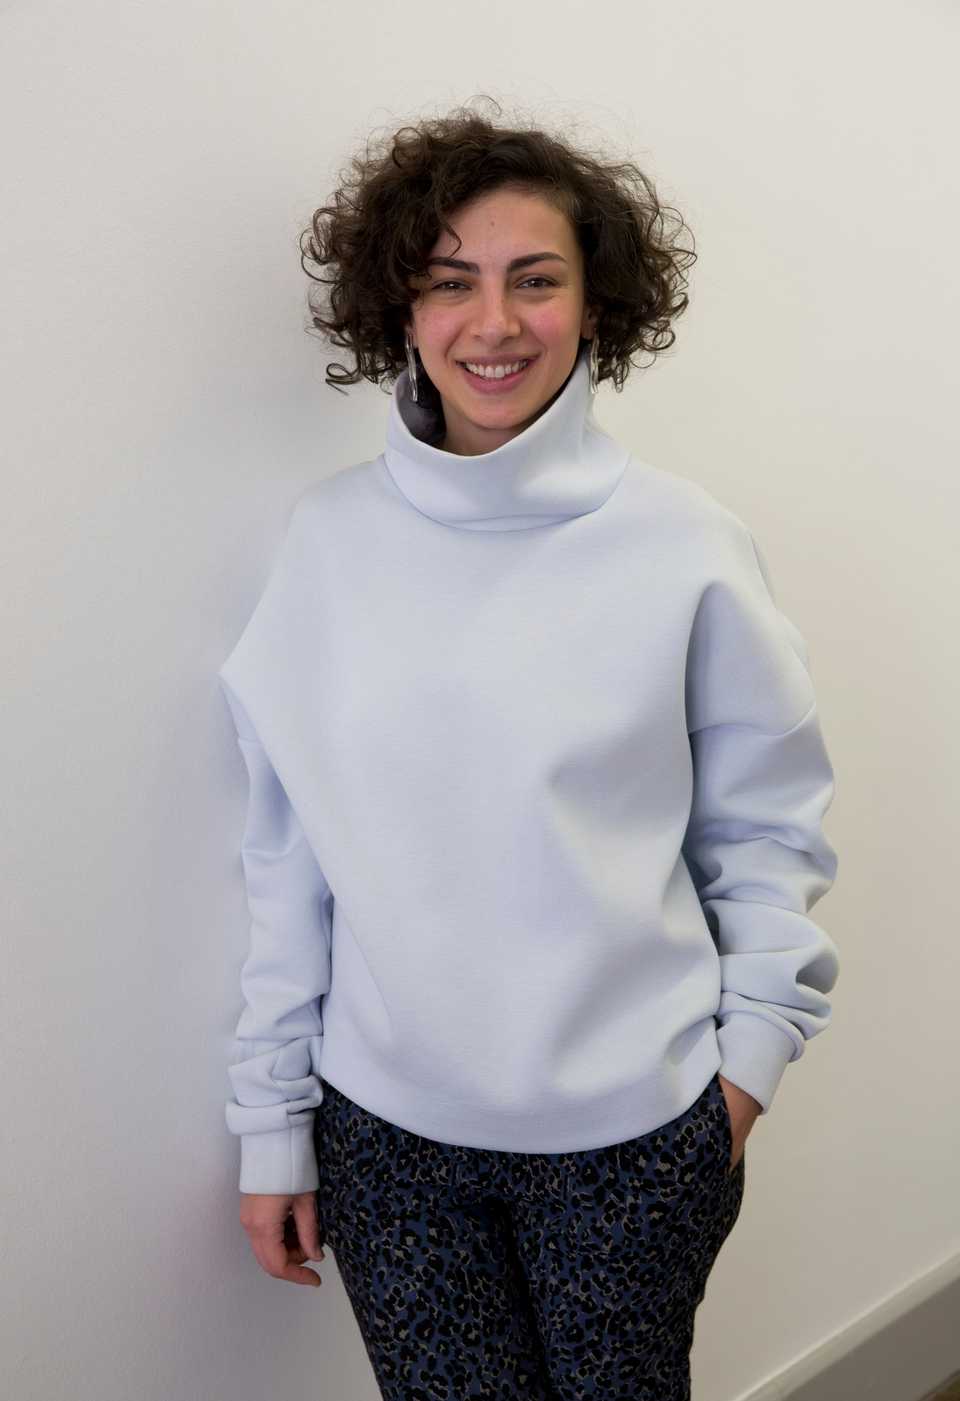 Ozlem Kaya is the co-chair of the Fashion Designers Association.